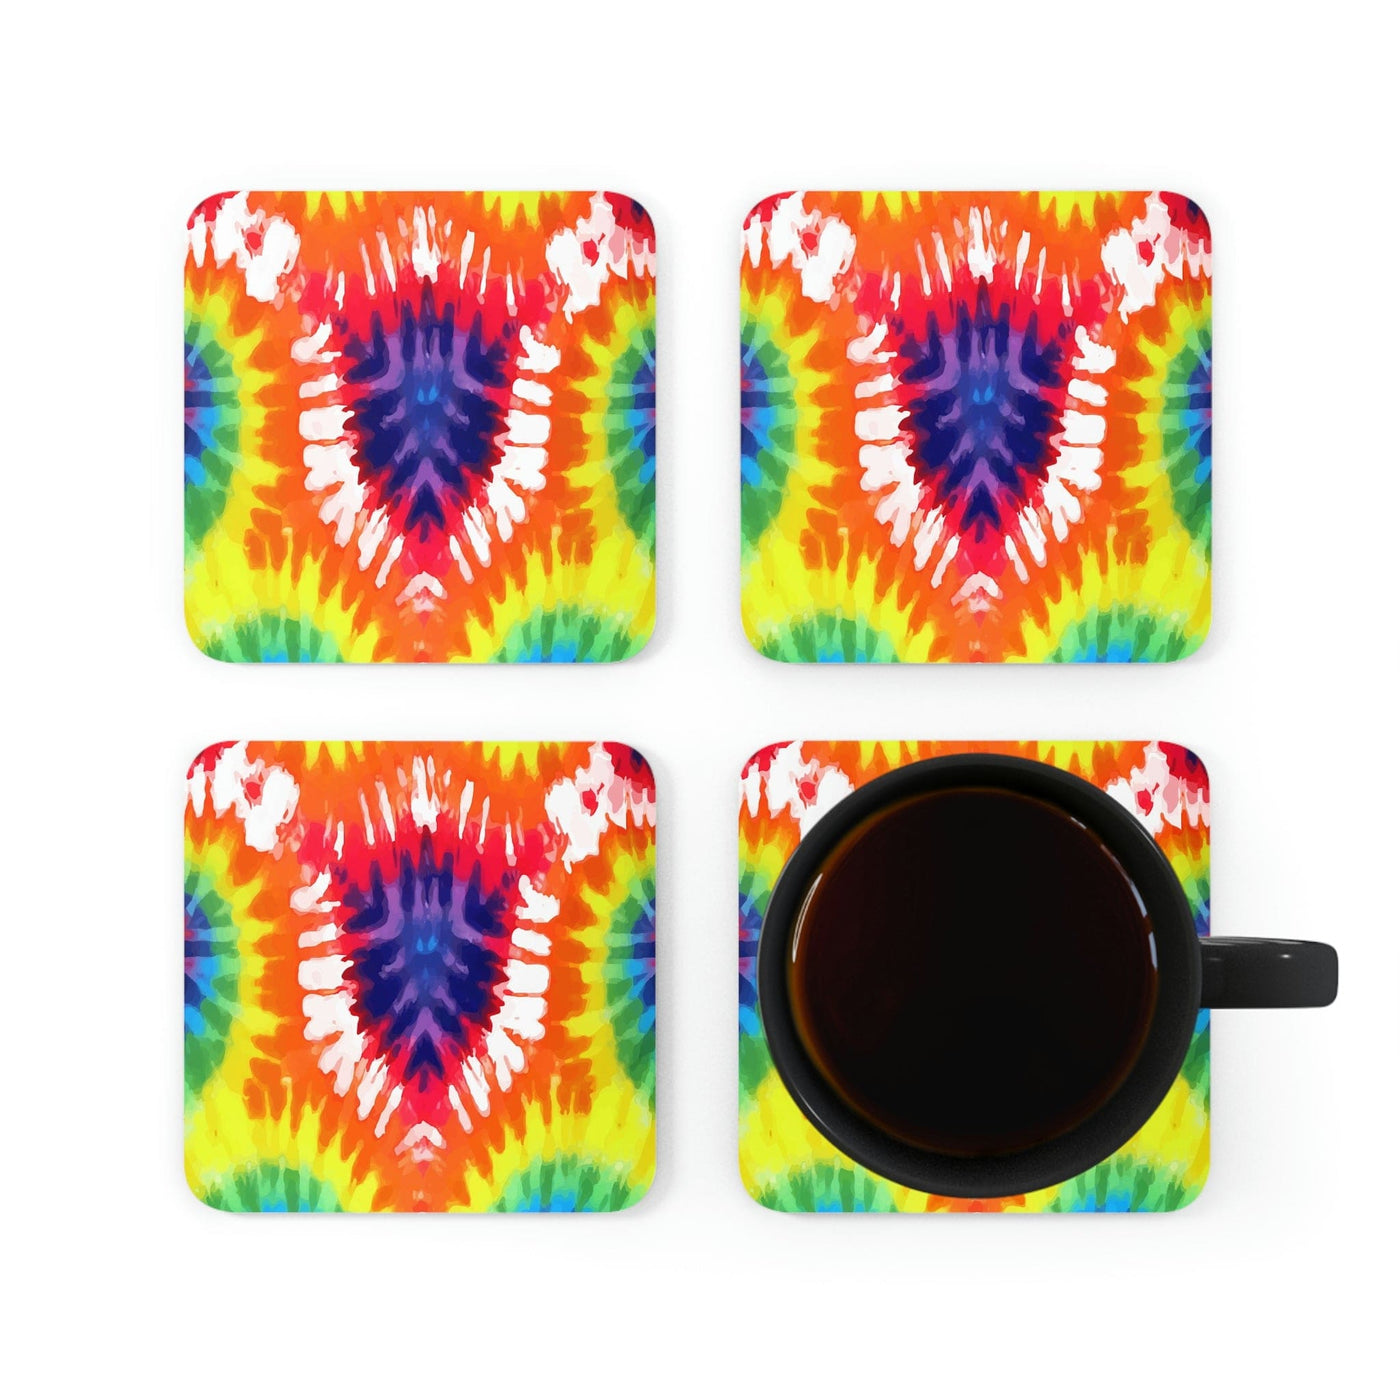 Home Decor Coaster Set - 4 Piece Home/office Psychedelic Rainbow Tie Dye